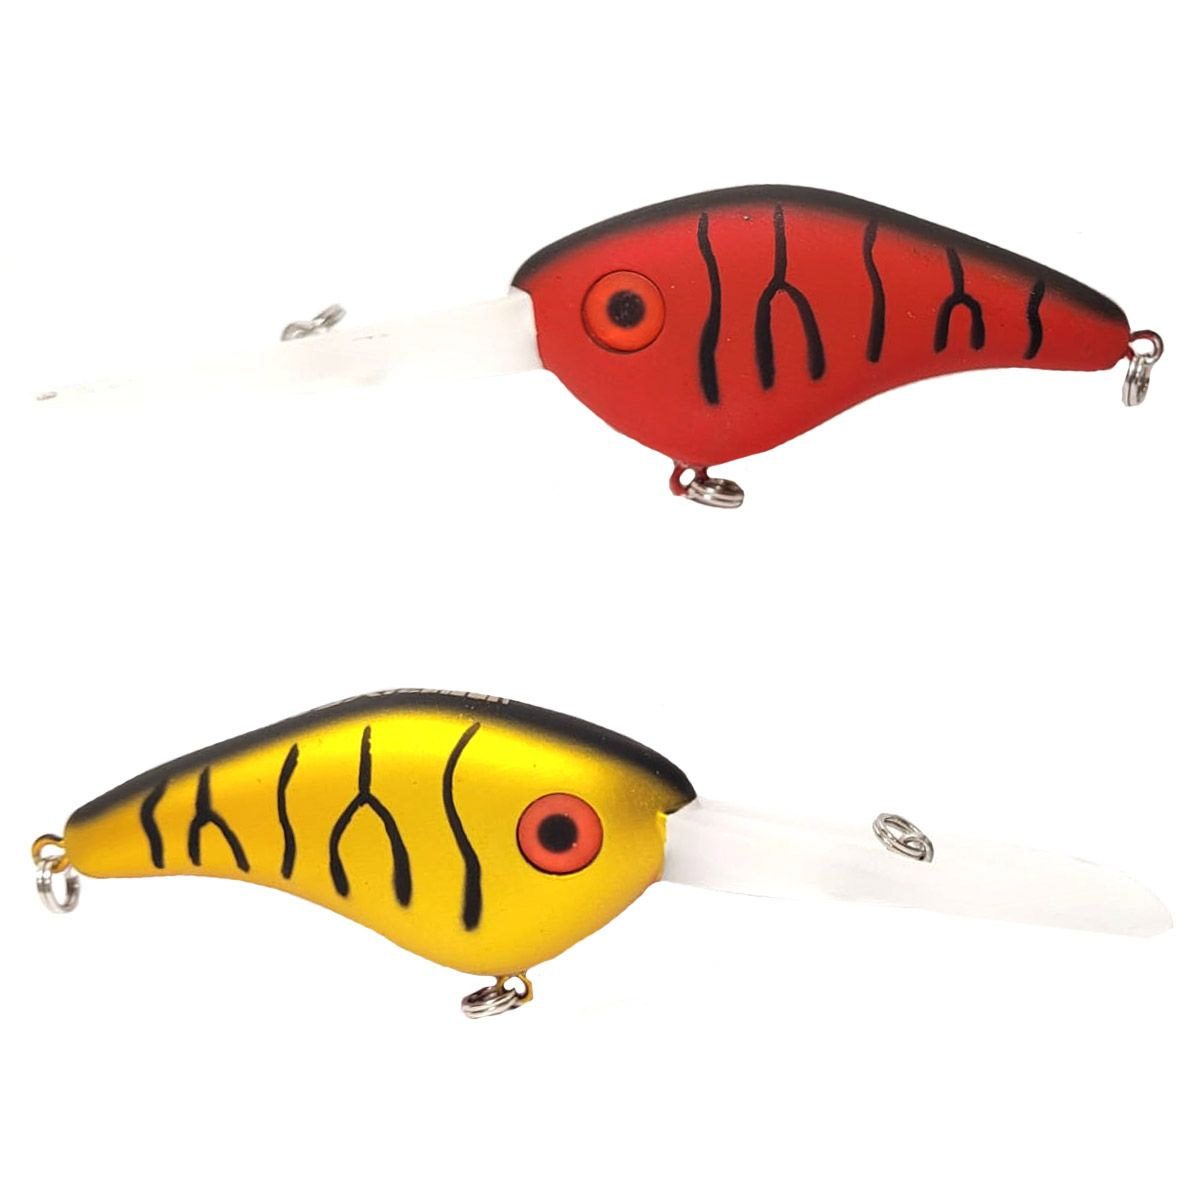 River7 Two Tone Crankbait 4+ Meter -  Red Gold Perch